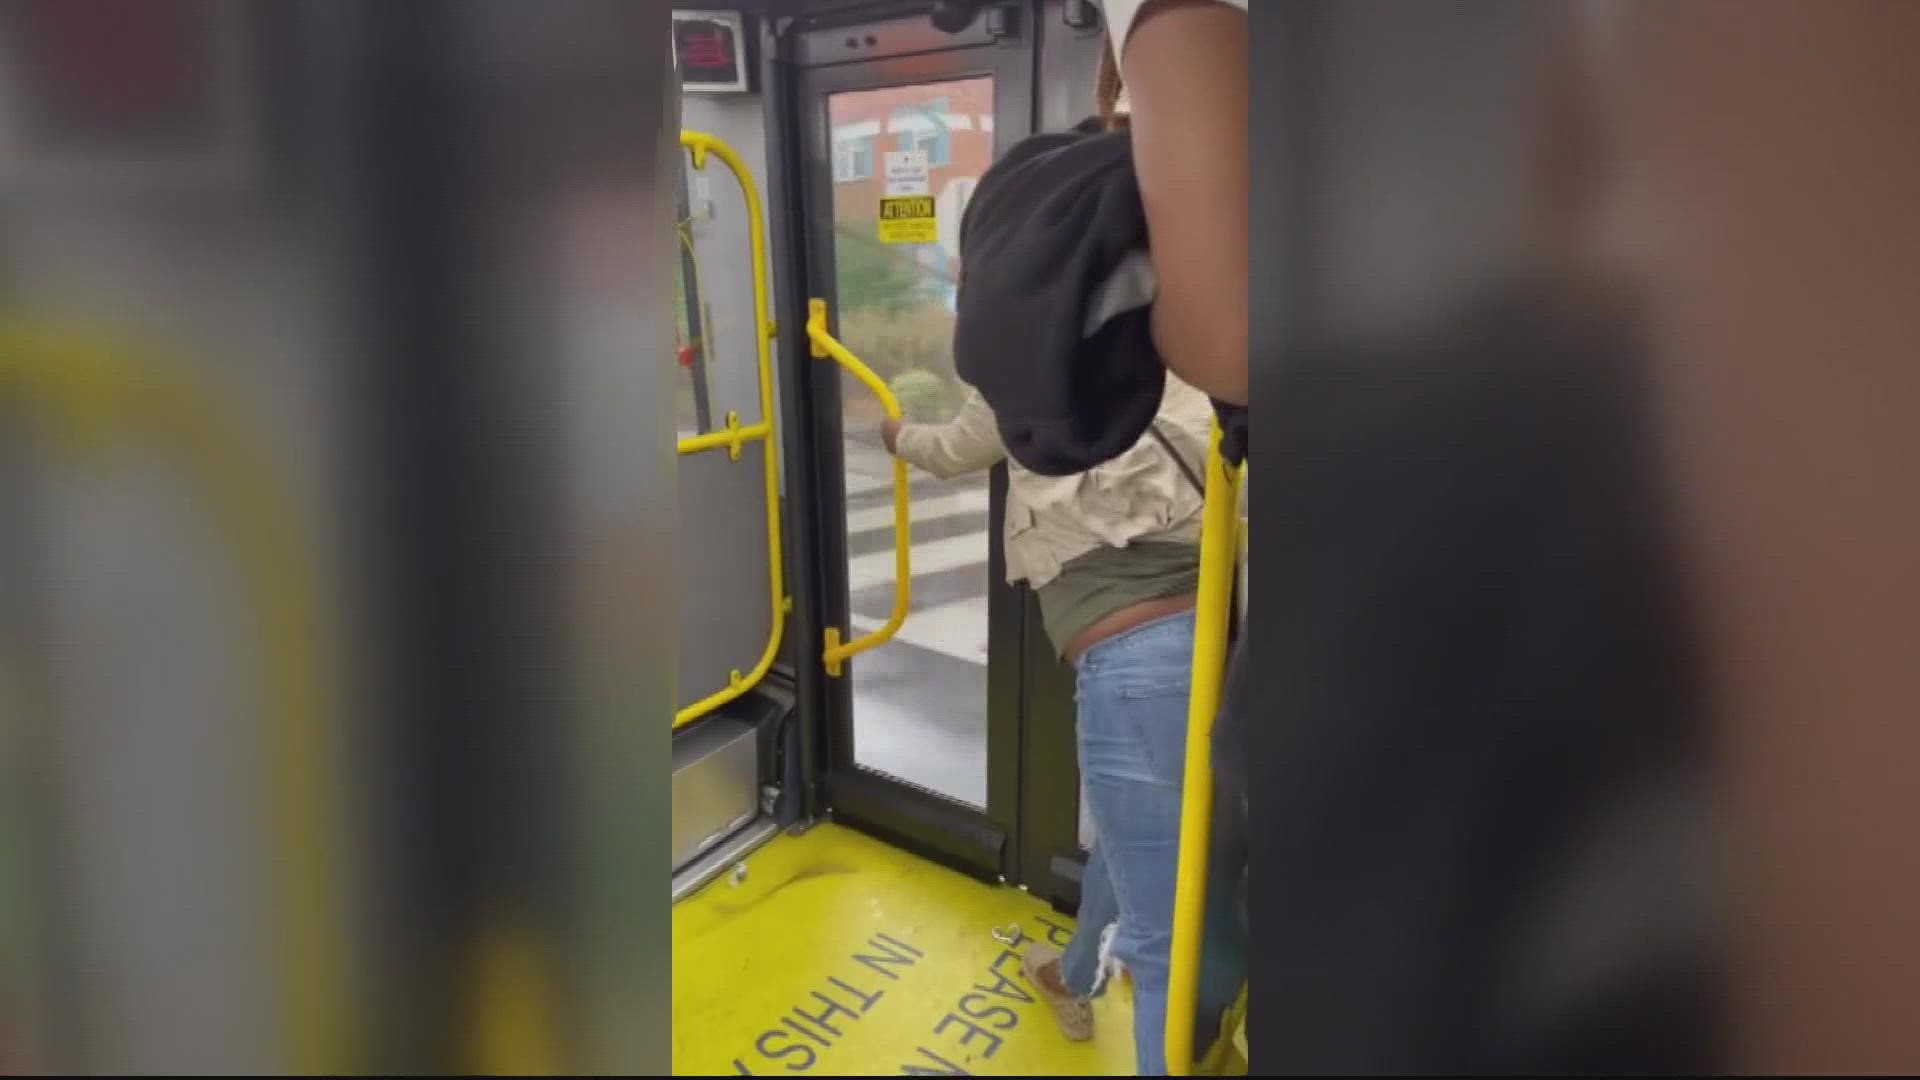 Metro Transit Police arrested two adults for assaulting and pushing a woman off a W4 Metrobus on Monday. More suspects are at large.